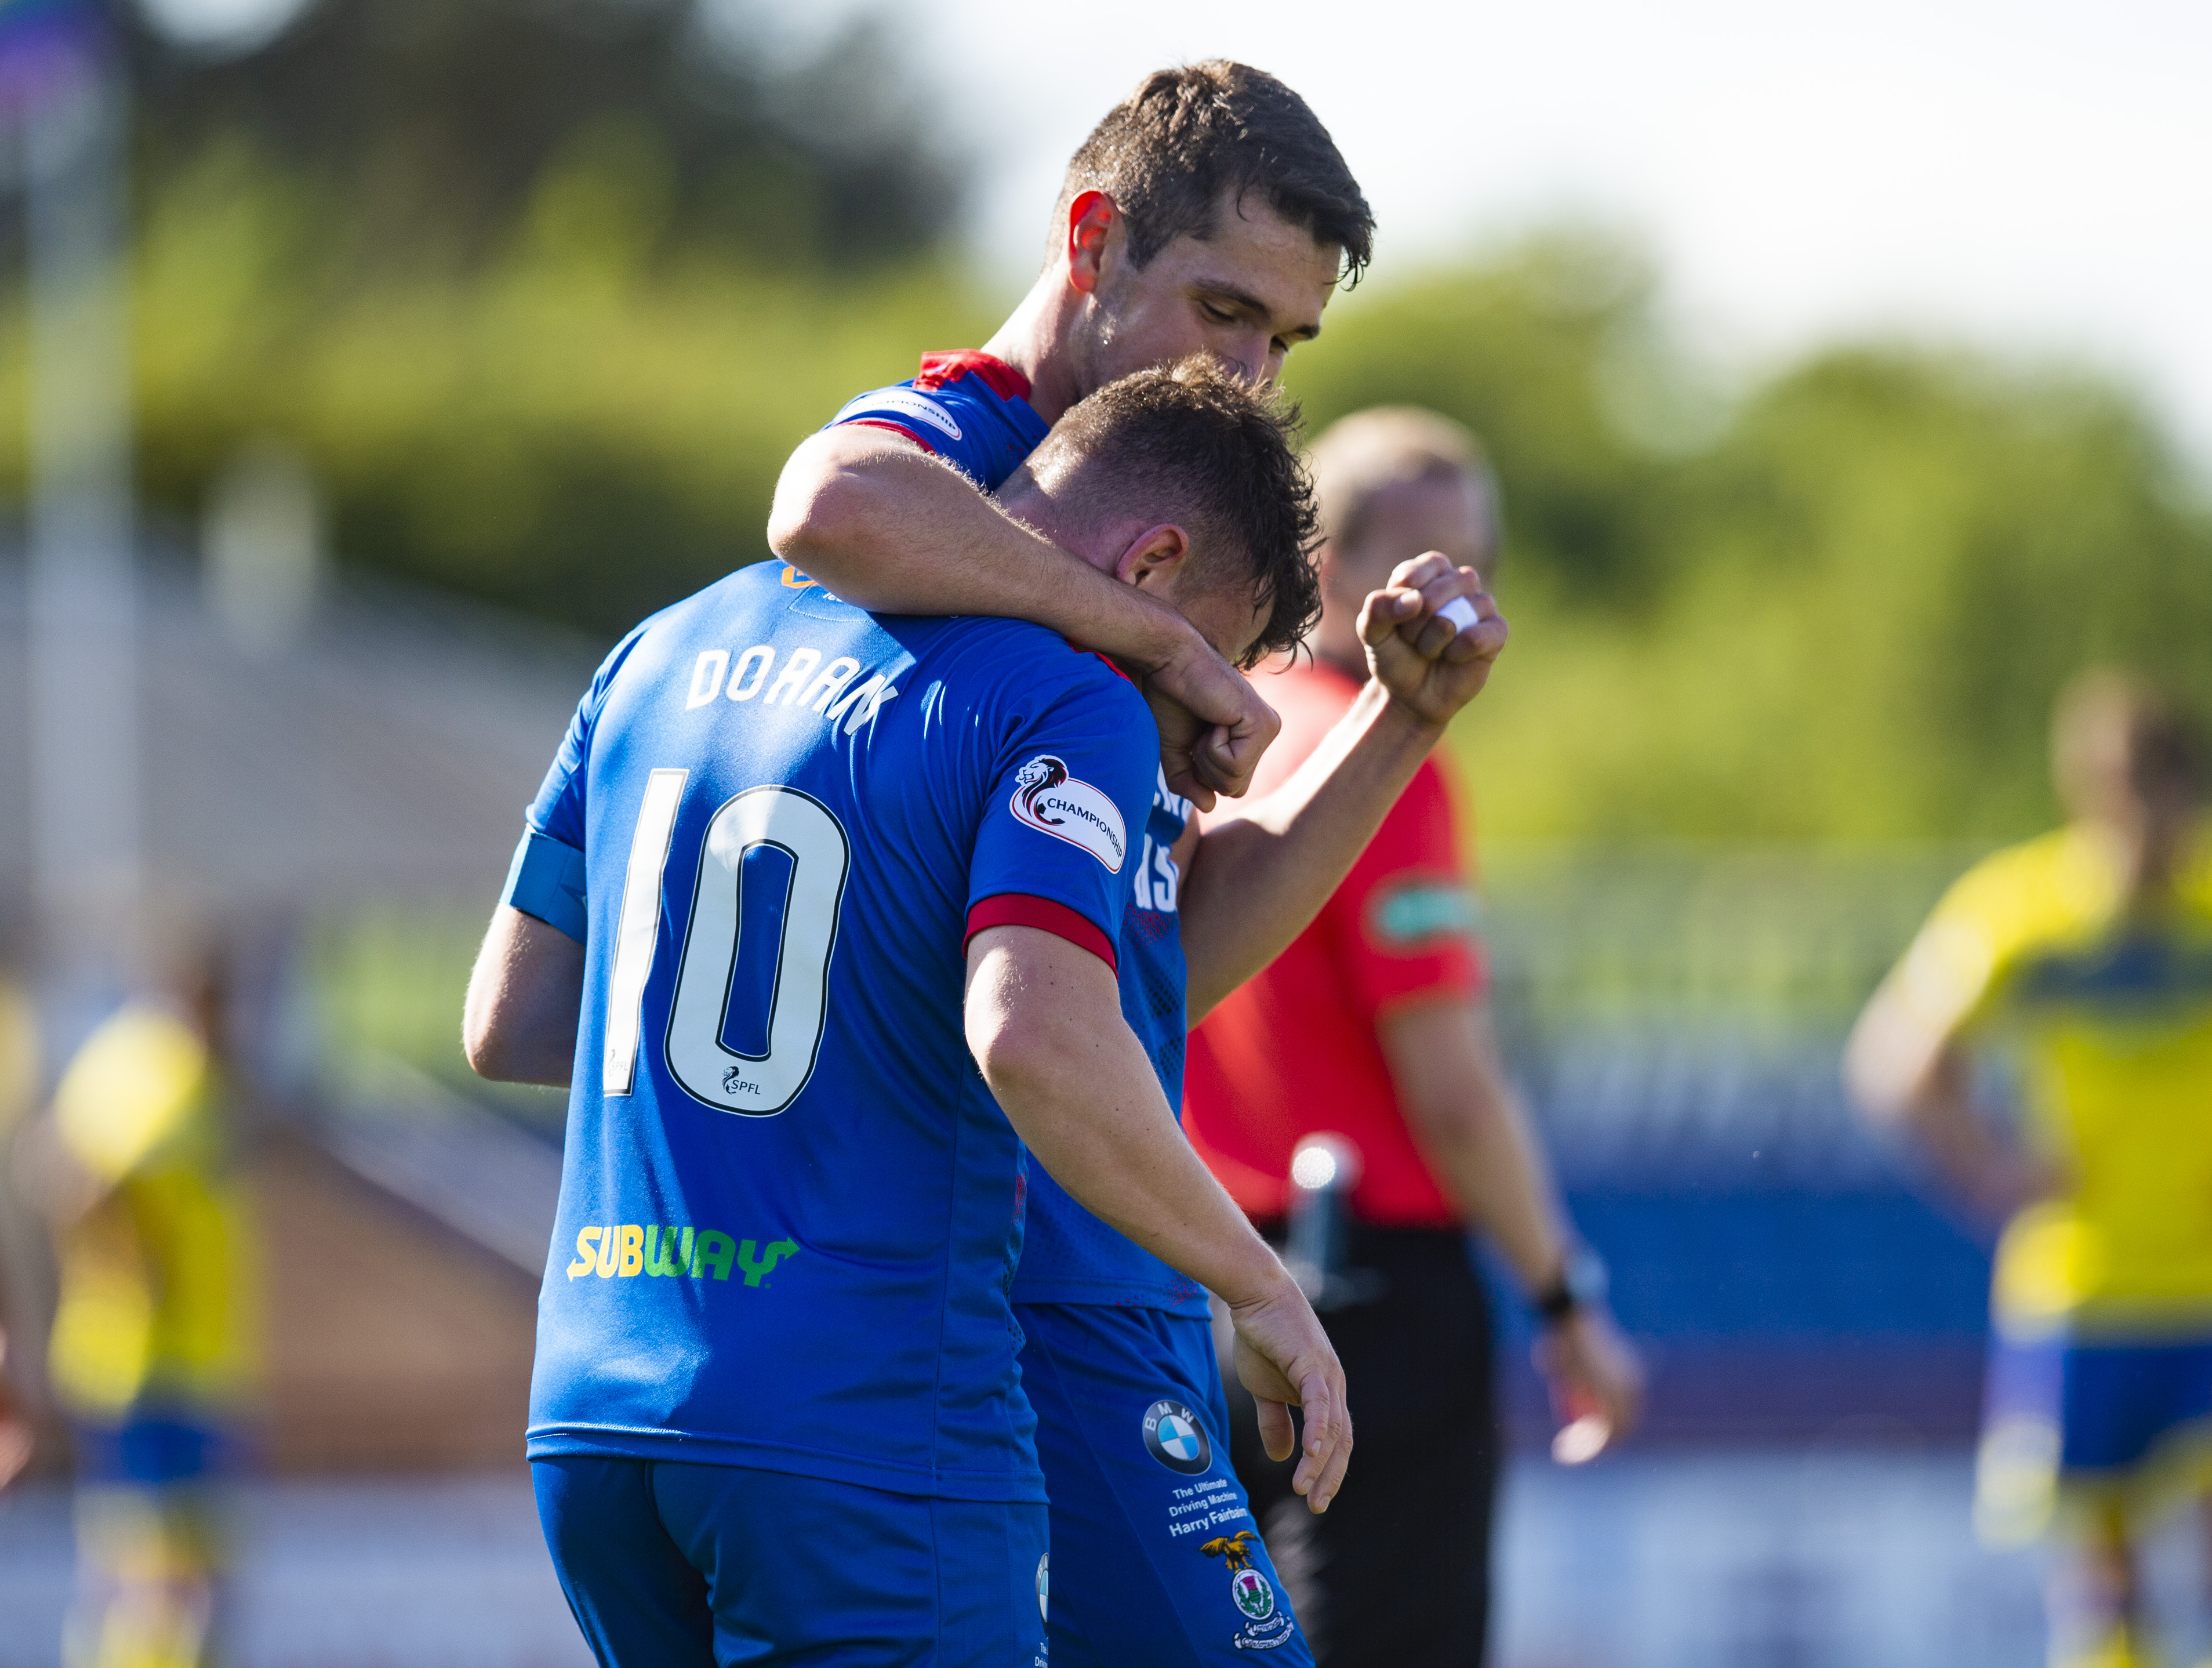 INVERNESS, SCOTLAND - SEPTEMBER 7:   Aaron Doran of Inverness celebrates his goal during the Tunnocks Caramel Wafer Challenge Cup 3rd Round between Inverness and Morton at Tulloch Caledonian Stadium, on September 7, 2019, in Inverness, Scotland. (Photo by Ross MacDonald / SNS Group)